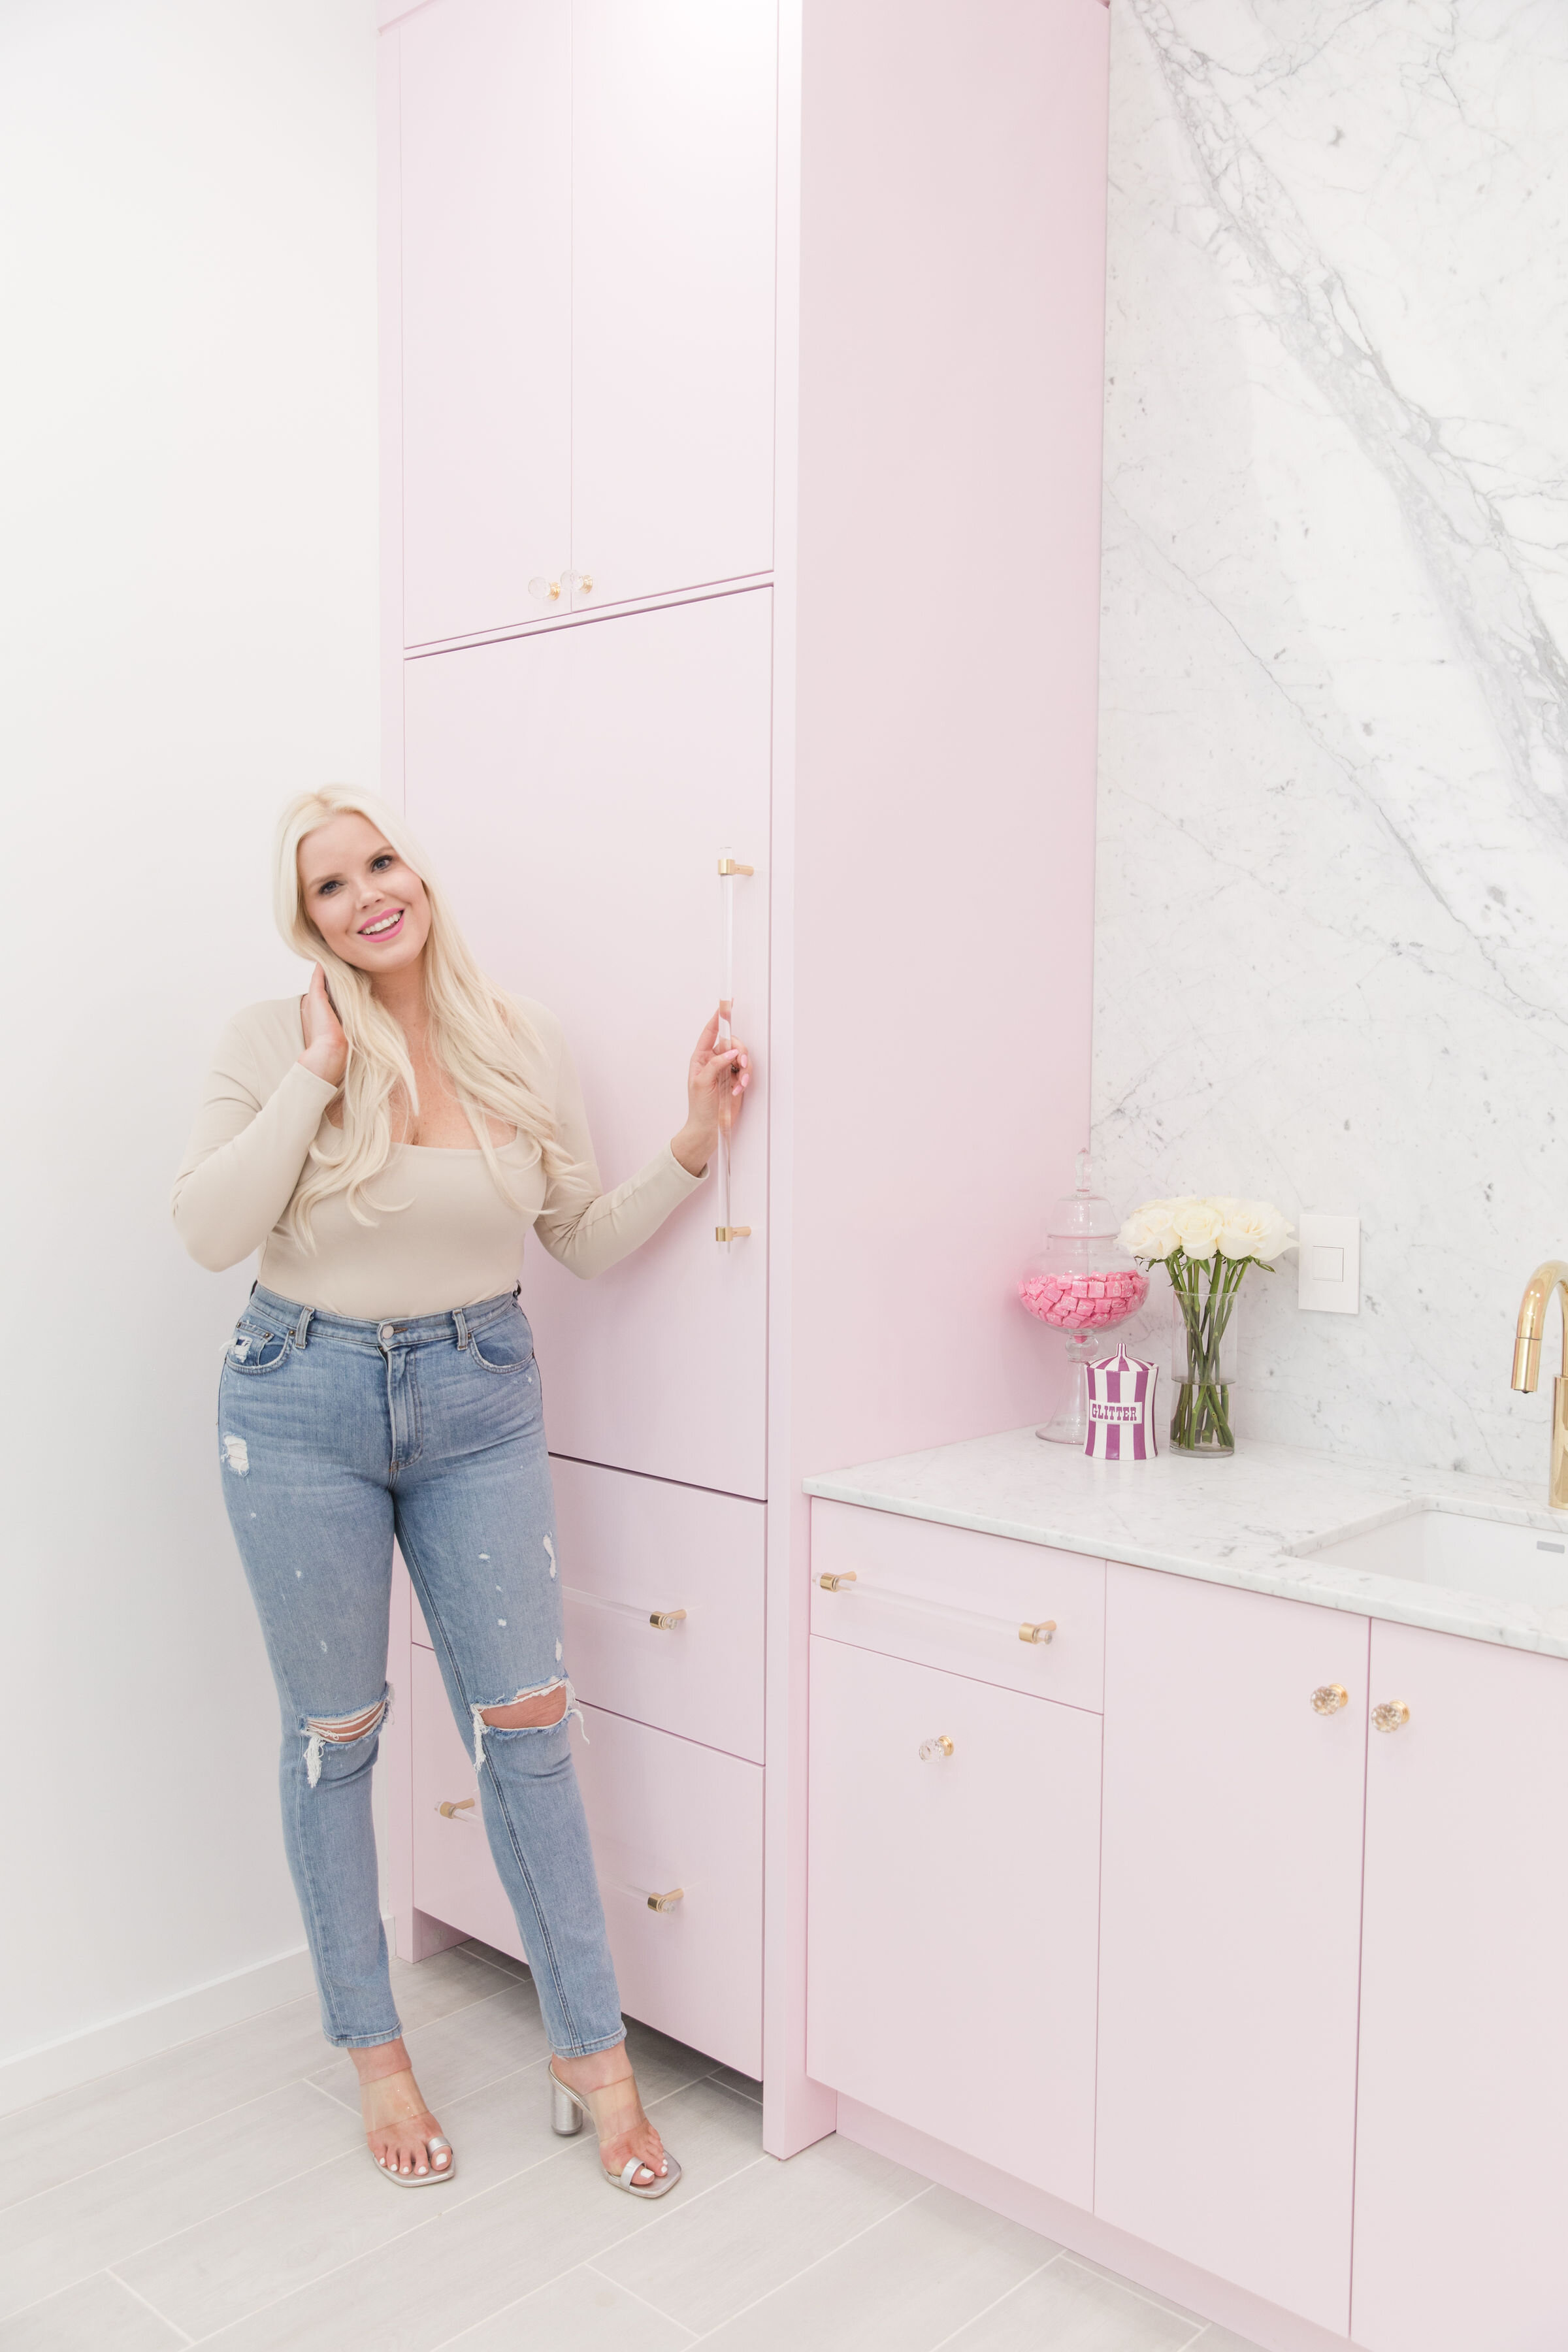 POSH-PR-The-Caroline-Doll-Barbie-Office-Pink-Style-Boss-Goals-At-Home-Workspace-Luxury-Fashion-Infused-Office-The-Doll-HQ-Chic-Agency-Custom-Dream-Kitchen-5.jpg